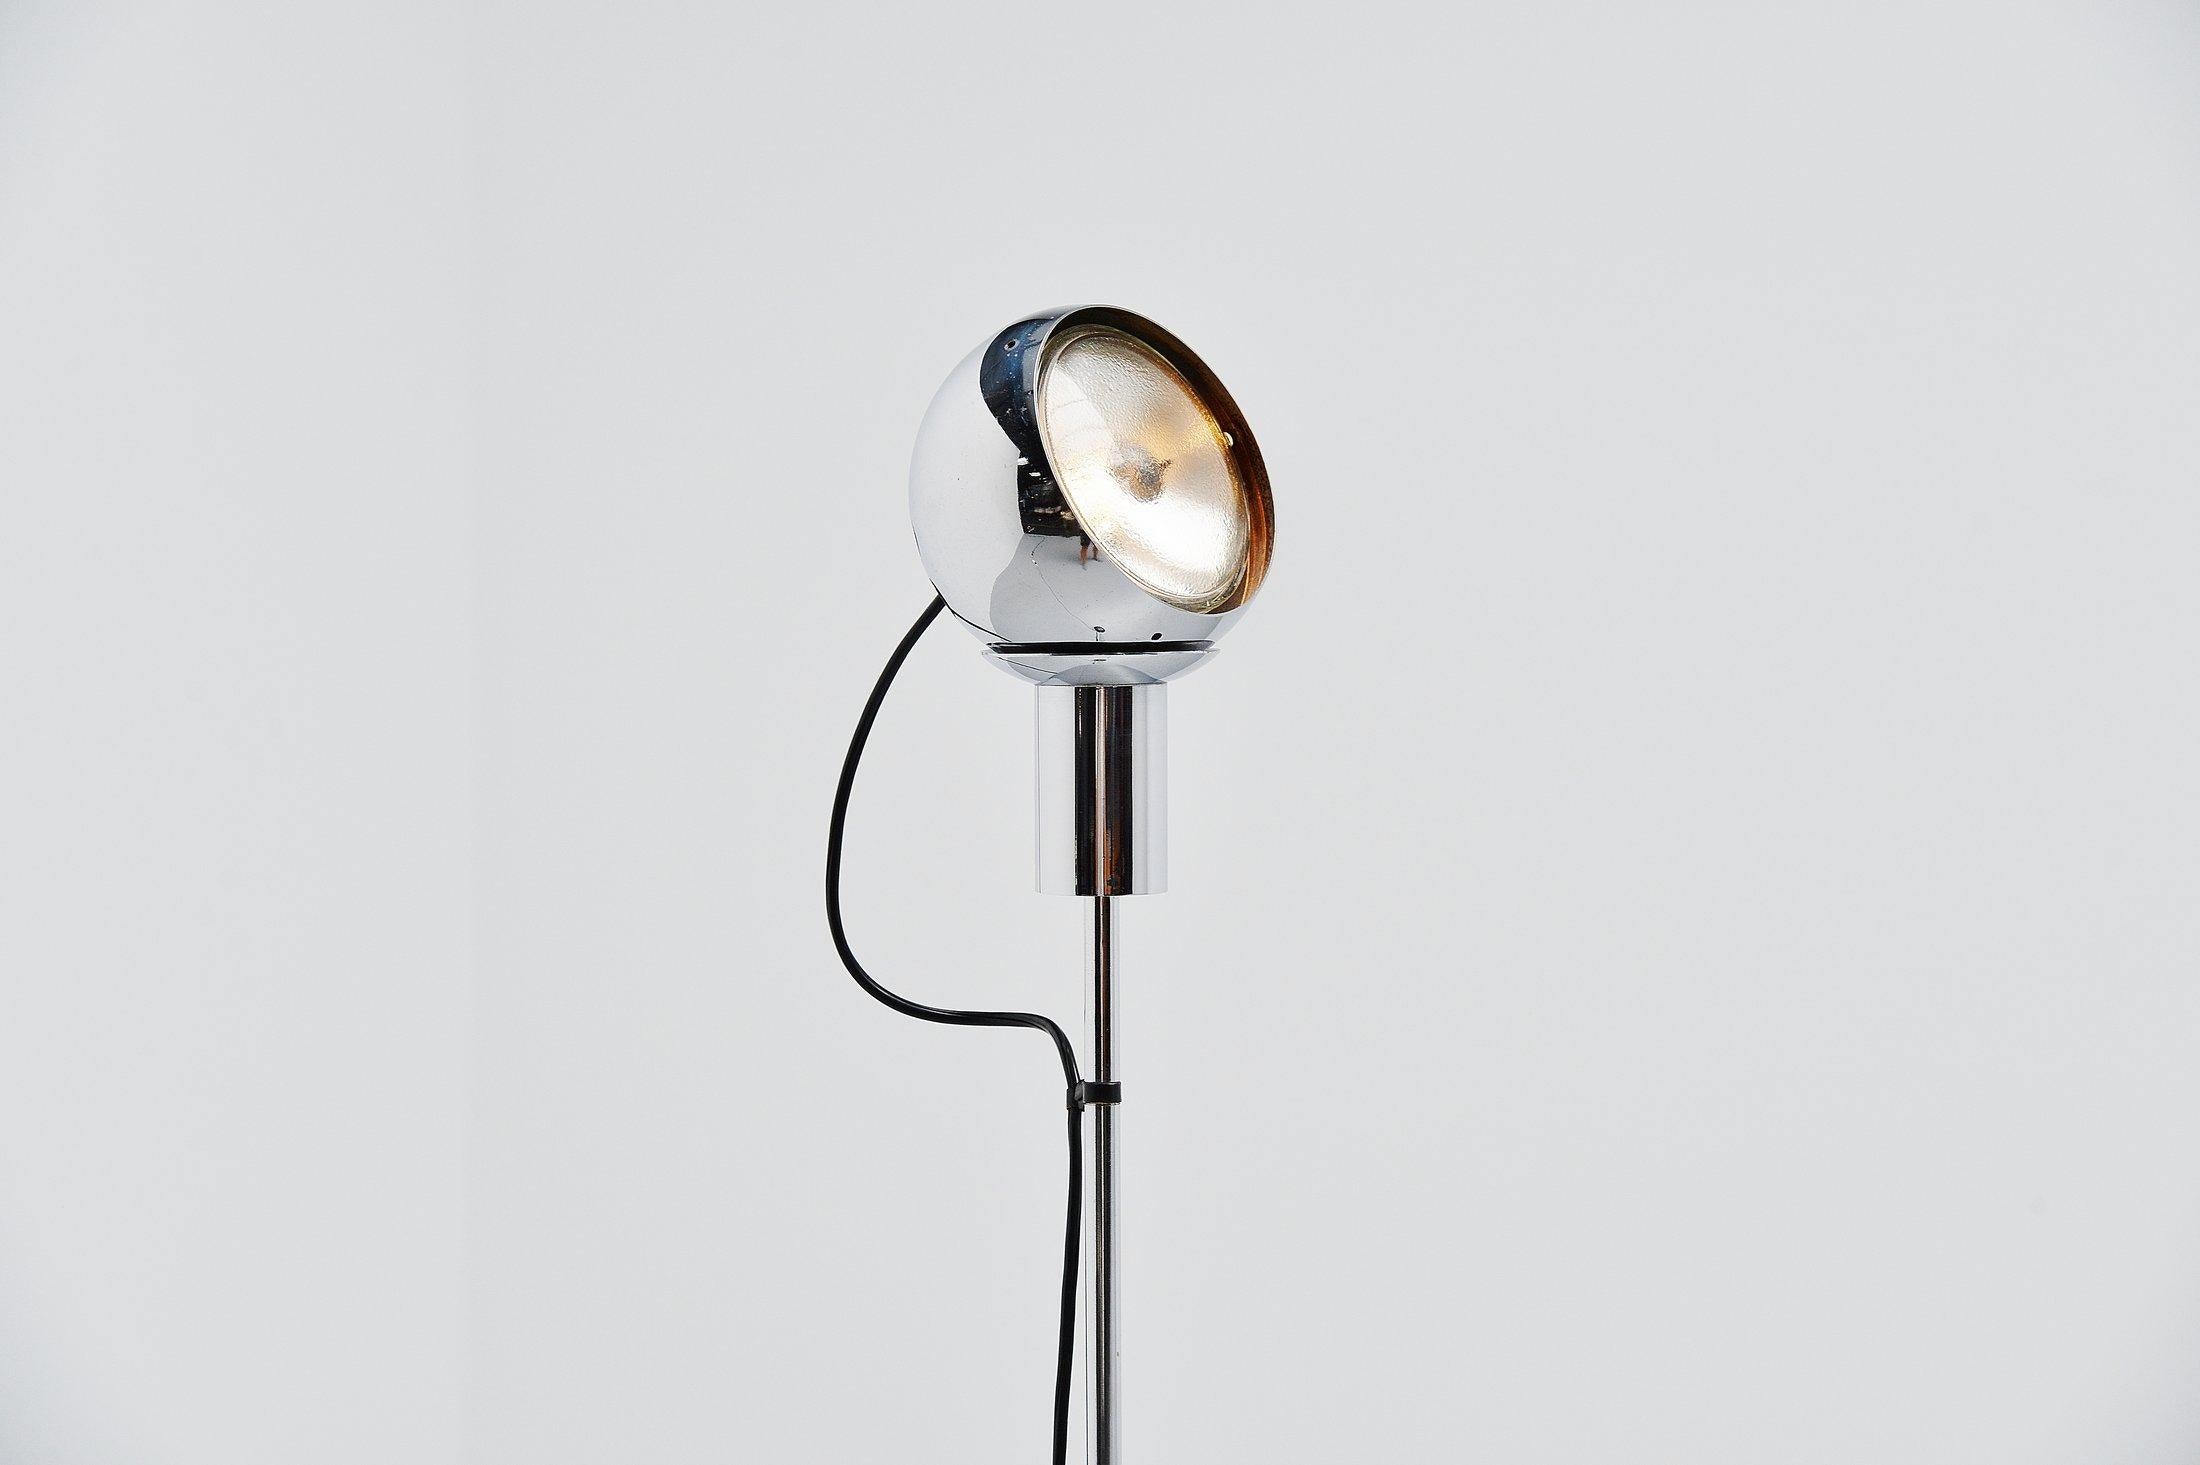 Very nice Minimalist floor lamp model 14002 designed by Angelo Lelli and manufactured by Arredoluce, Italy, 1966. The lamp has a metal base with incorporated transformer and on/off switch. Stem in magnetized and chrome-plated steel, adjustable